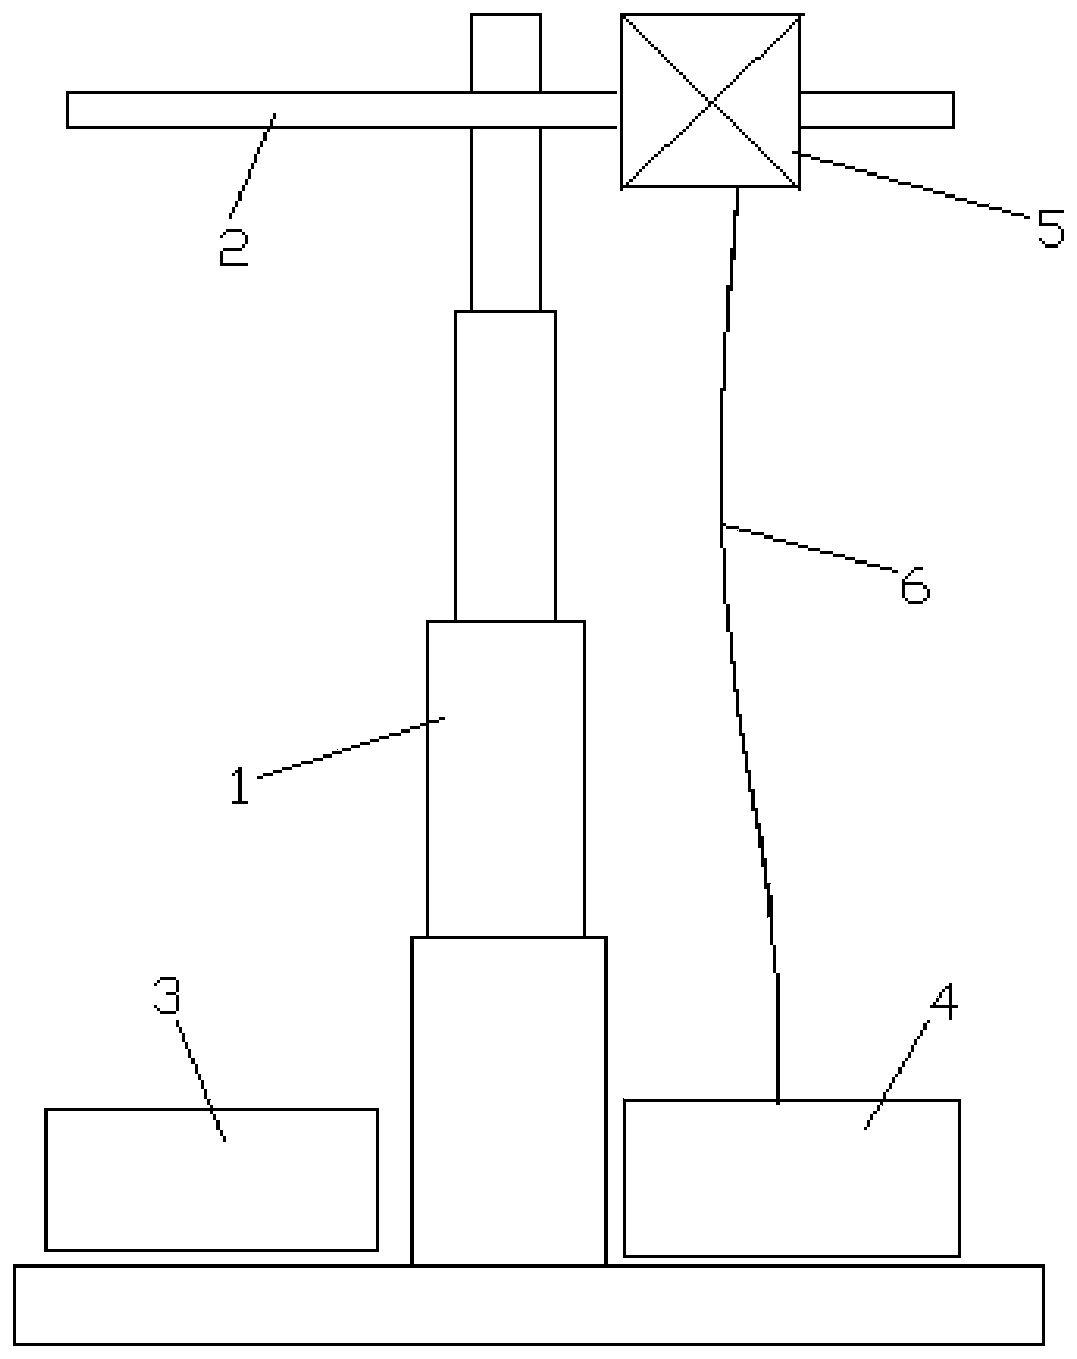 Projectile echo simulating device and method for emplacement reconnaissance and fire-directing radar